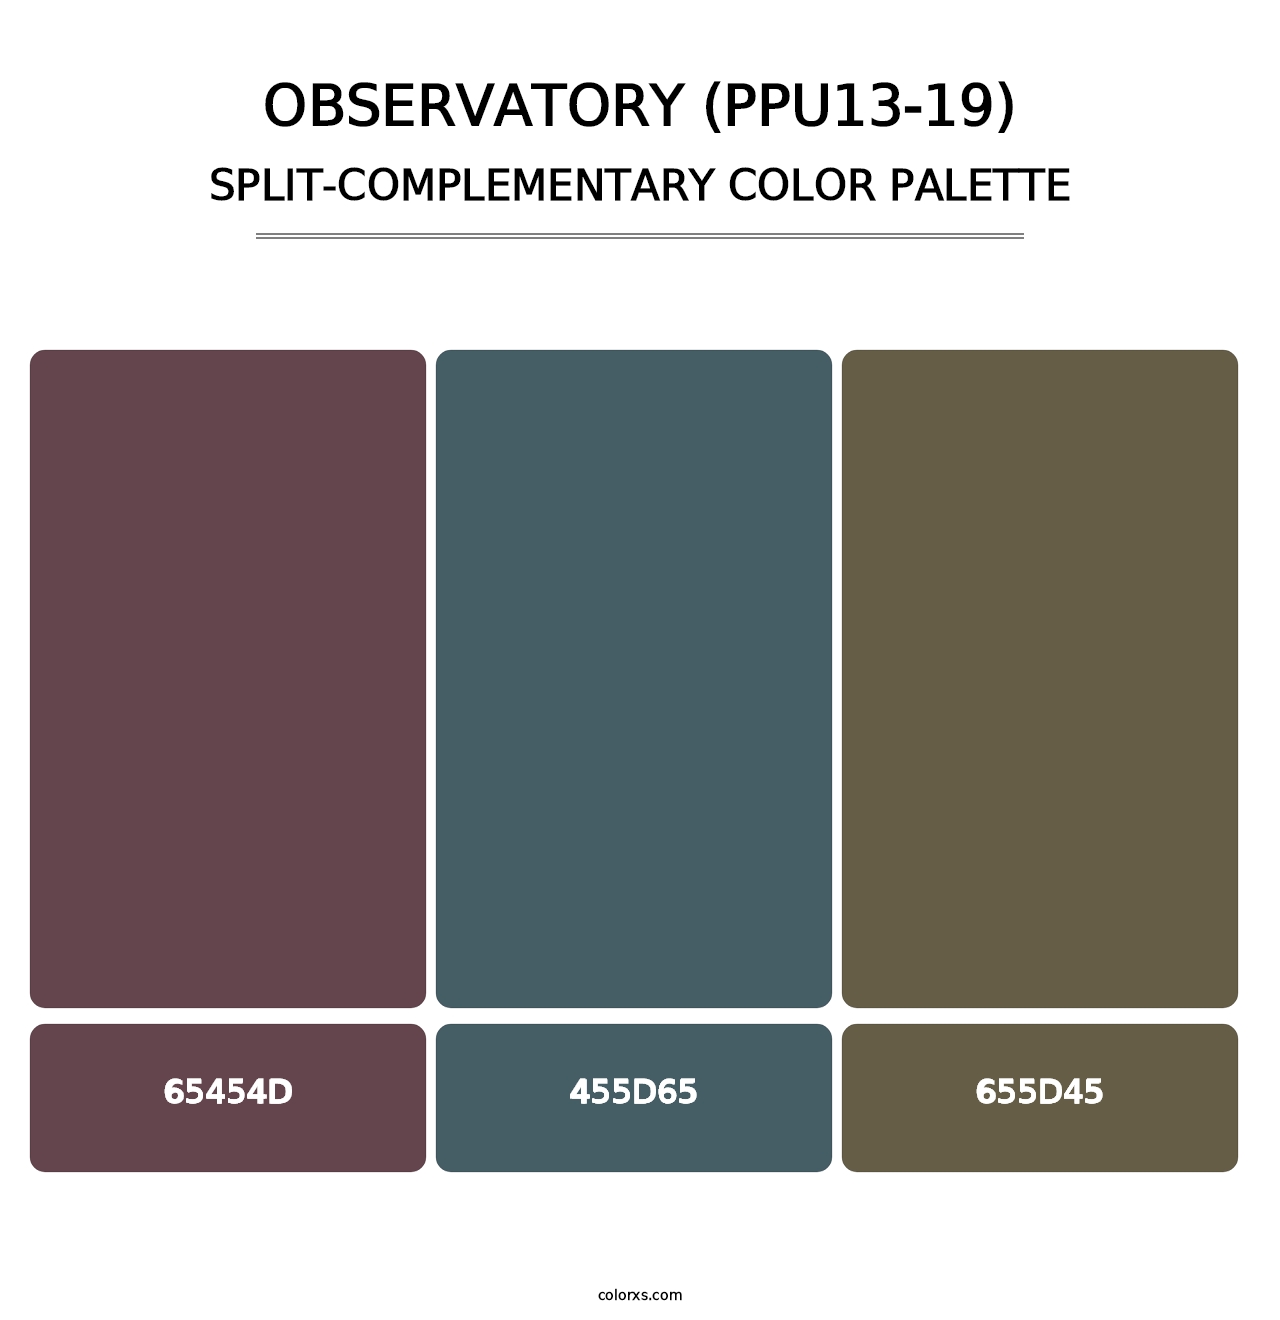 Observatory (PPU13-19) - Split-Complementary Color Palette